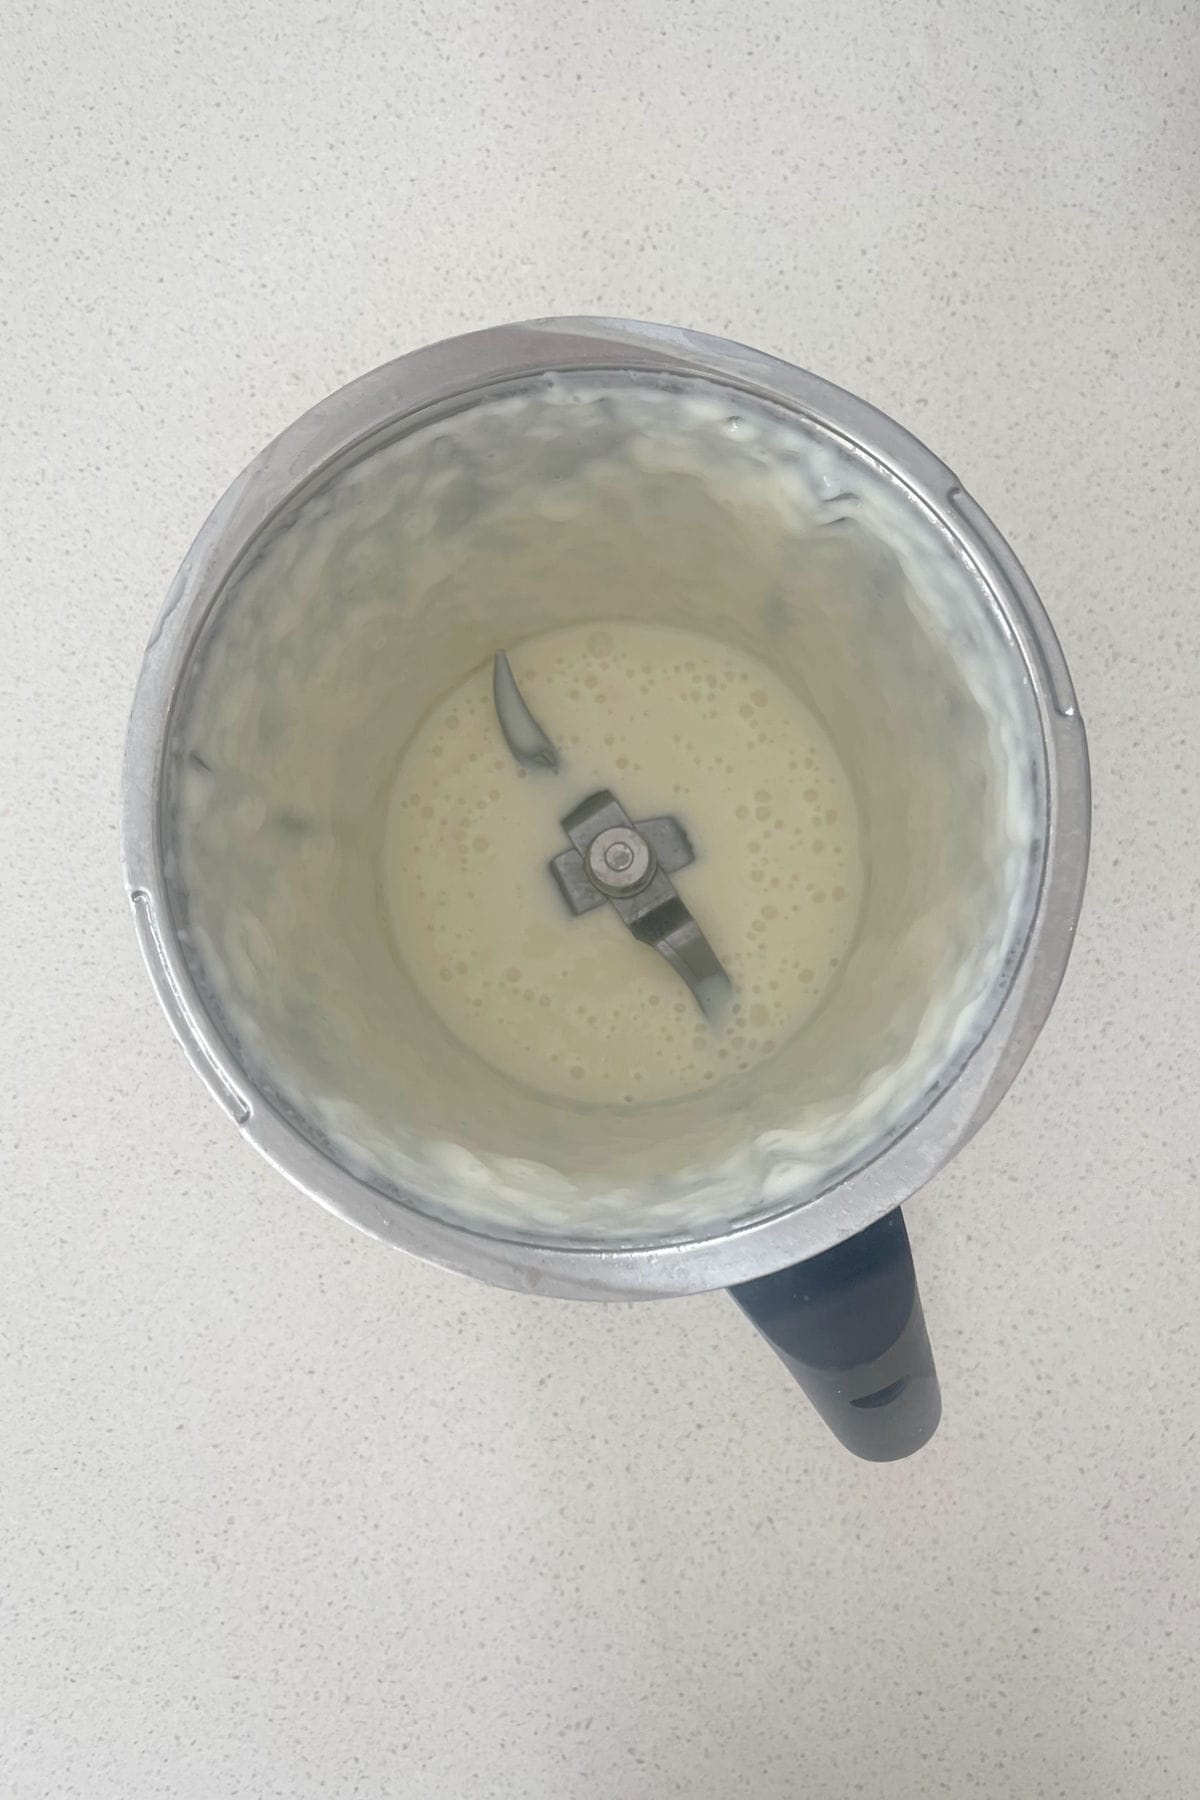 Cheesecake filling for jelly slice in a thermomix bowl.